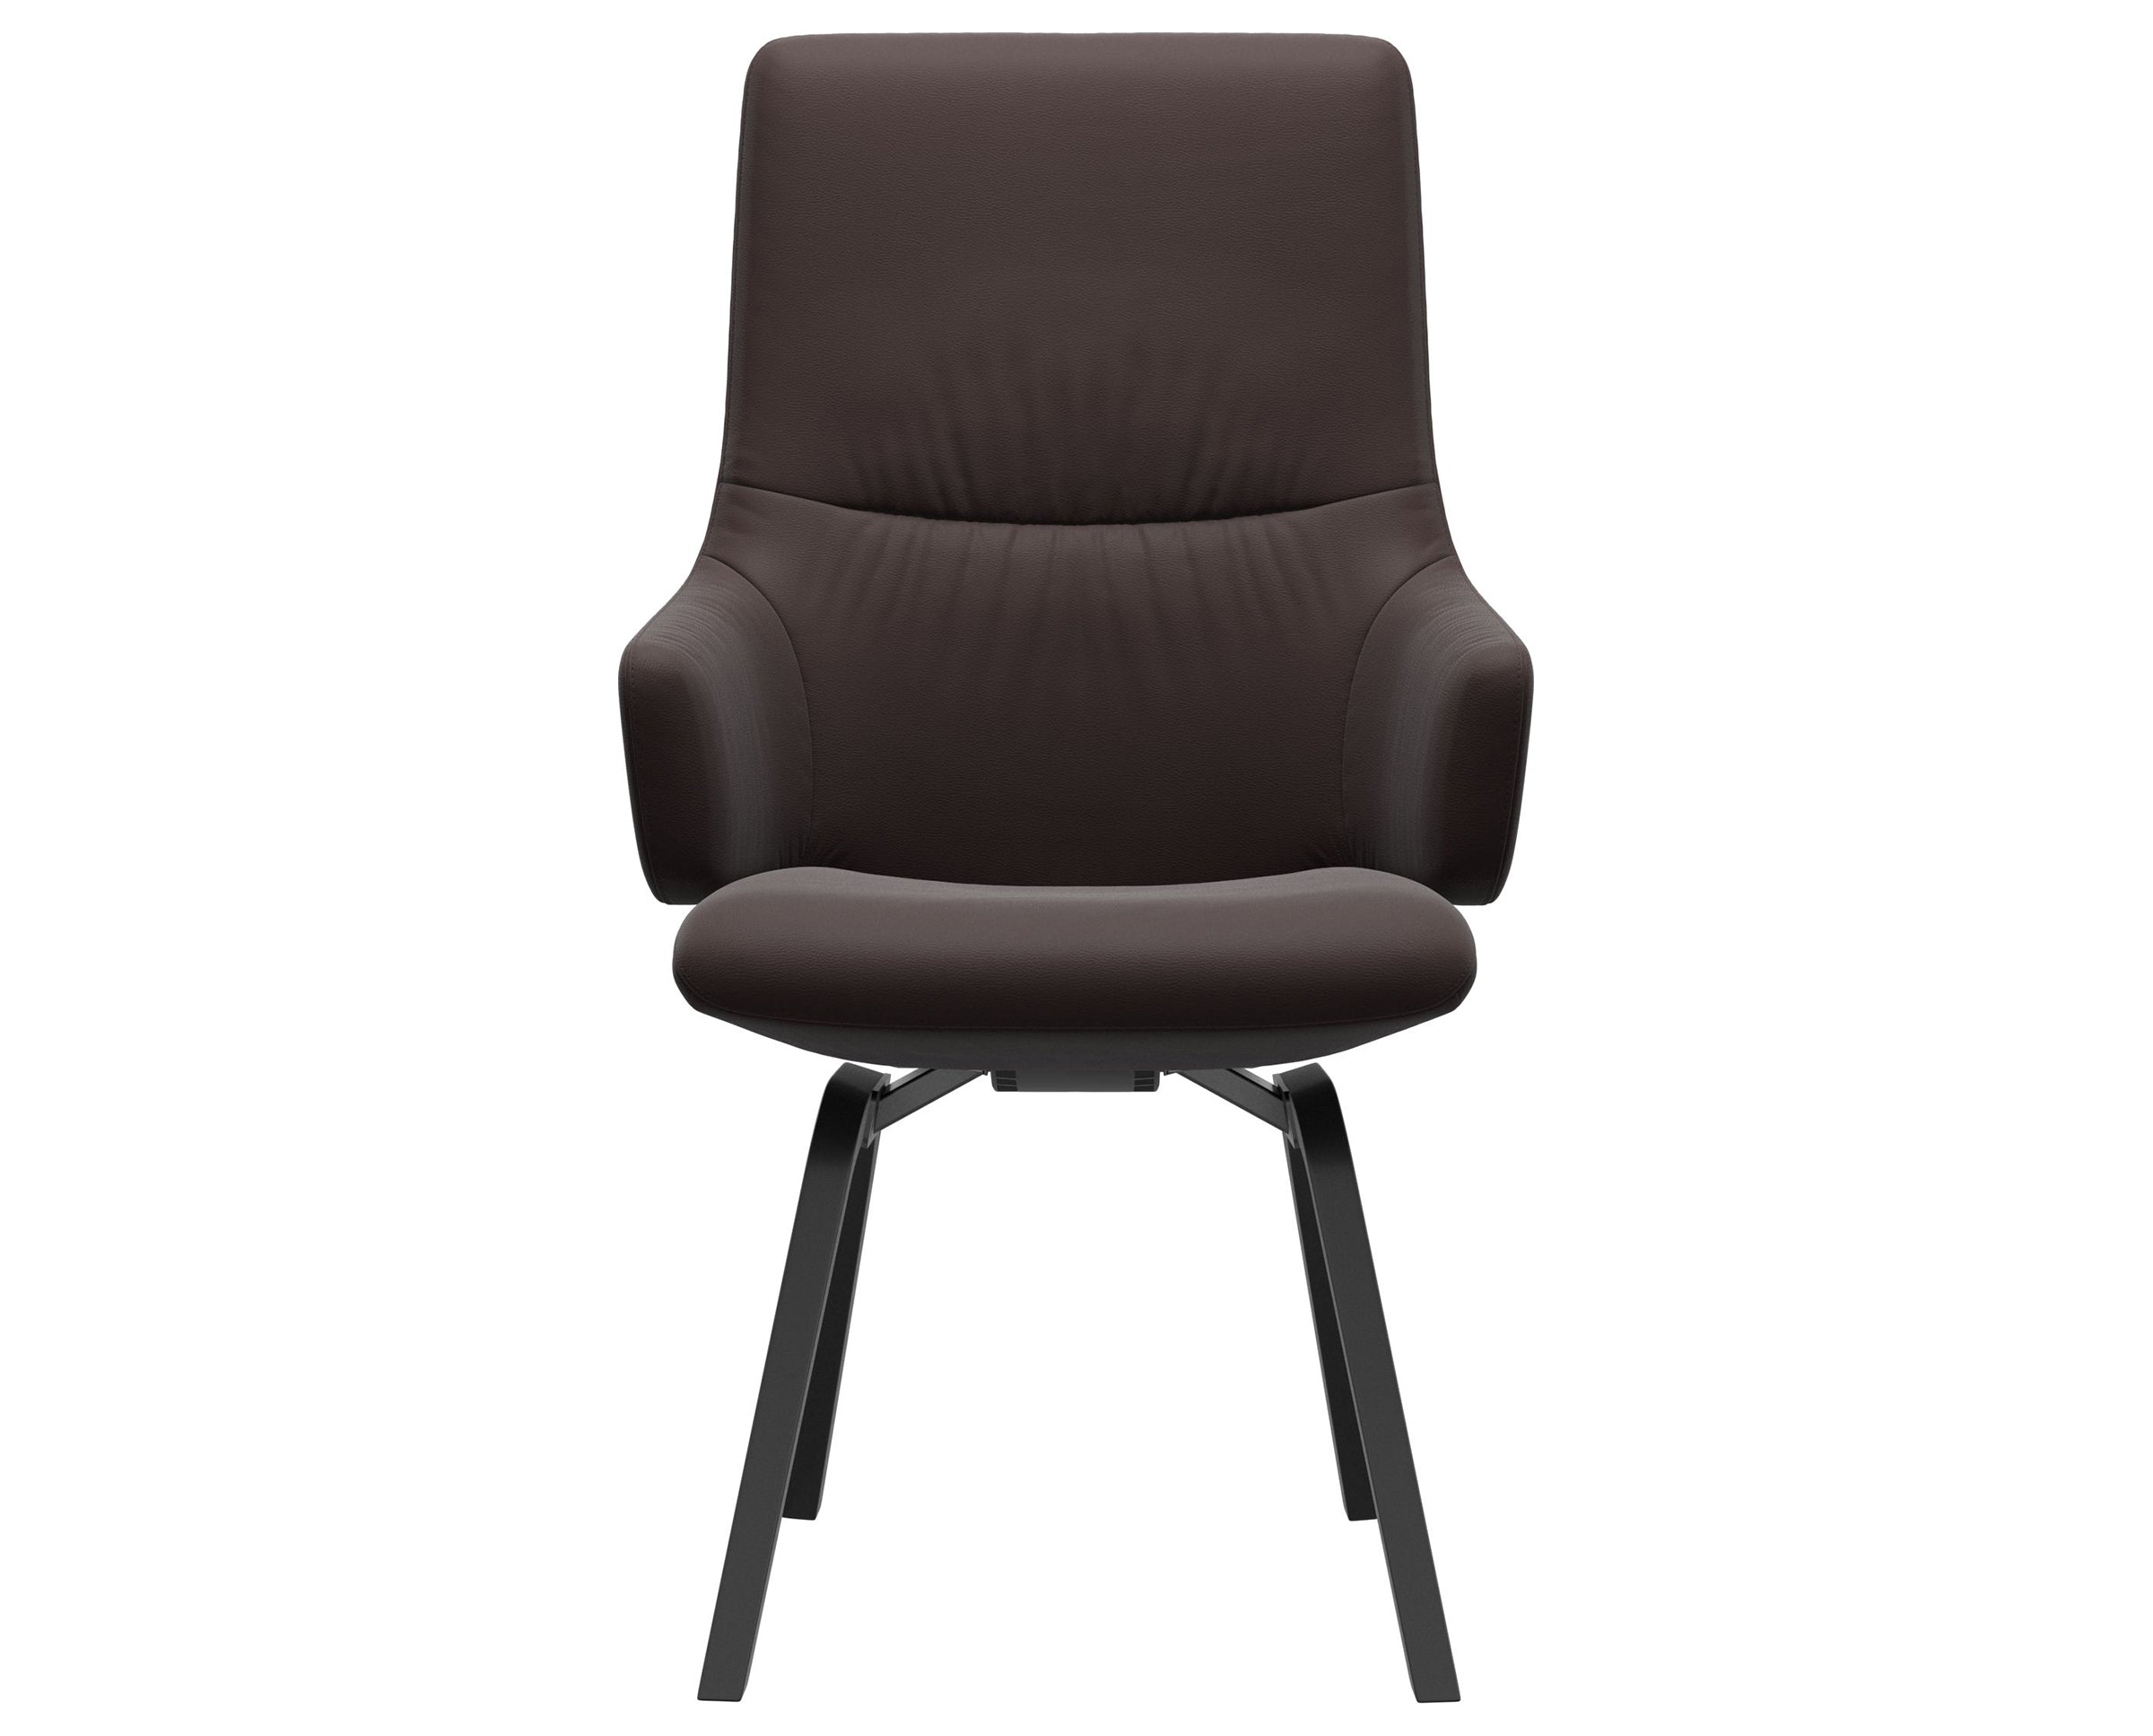 Paloma Leather Chocolate and Black Base | Stressless Mint High Back D200 Dining Chair w/Arms | Valley Ridge Furniture